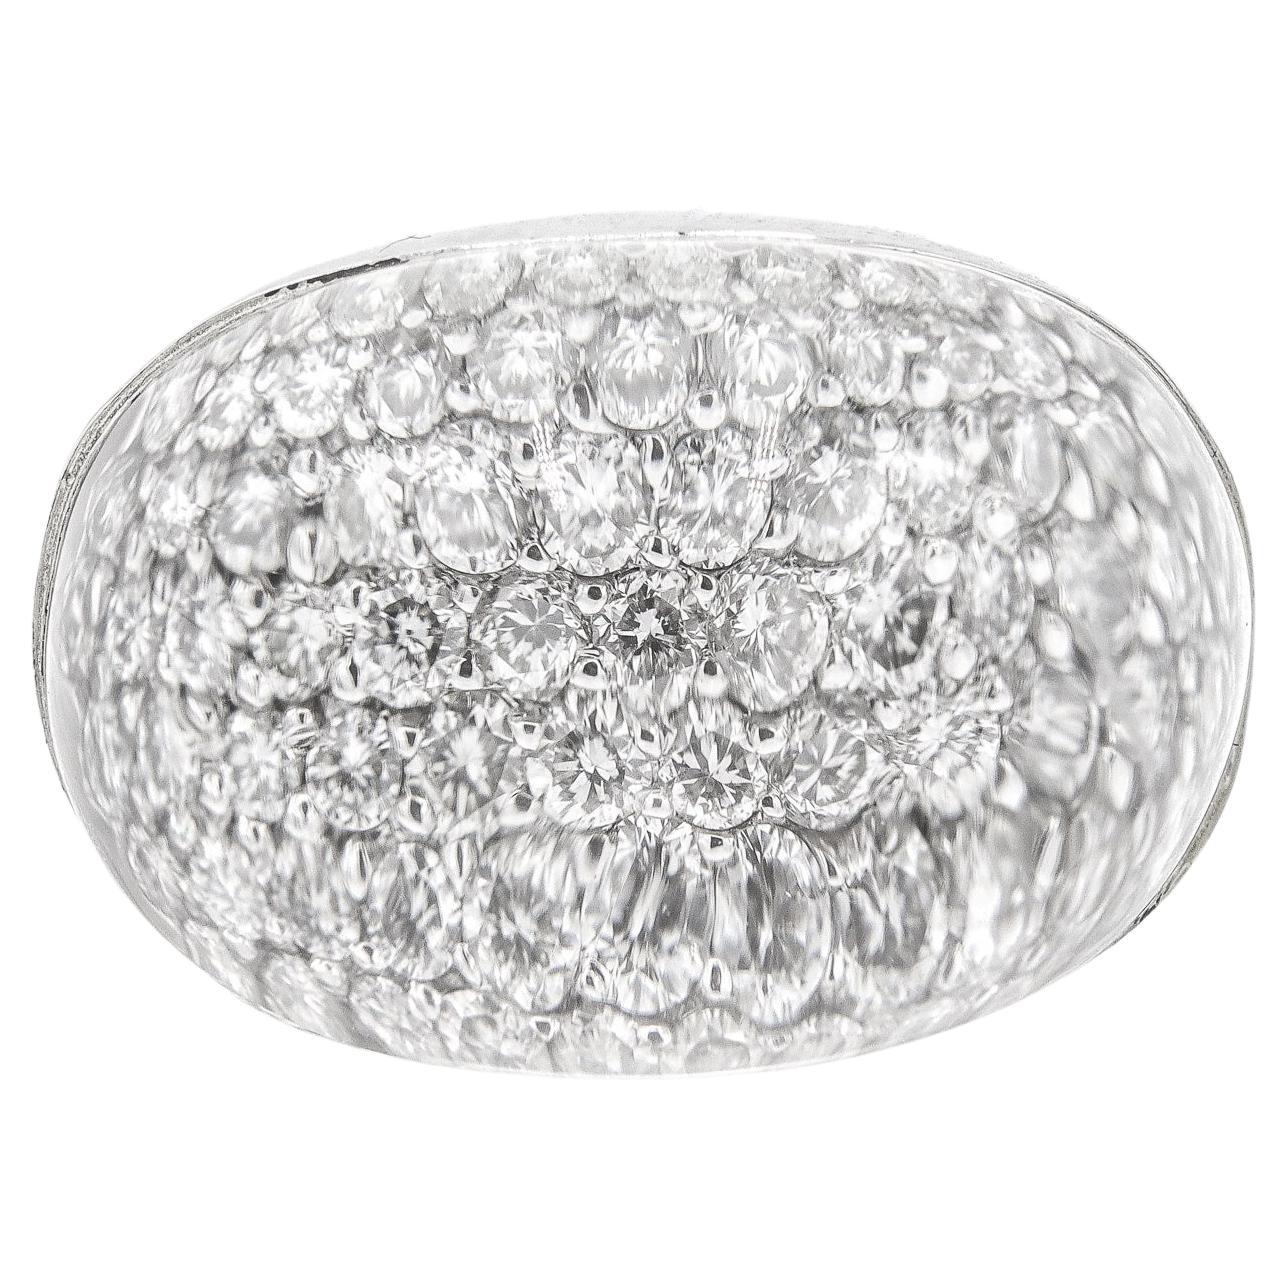 Ladies Cocktail Diamonds 18k White Gold Ring For Sale